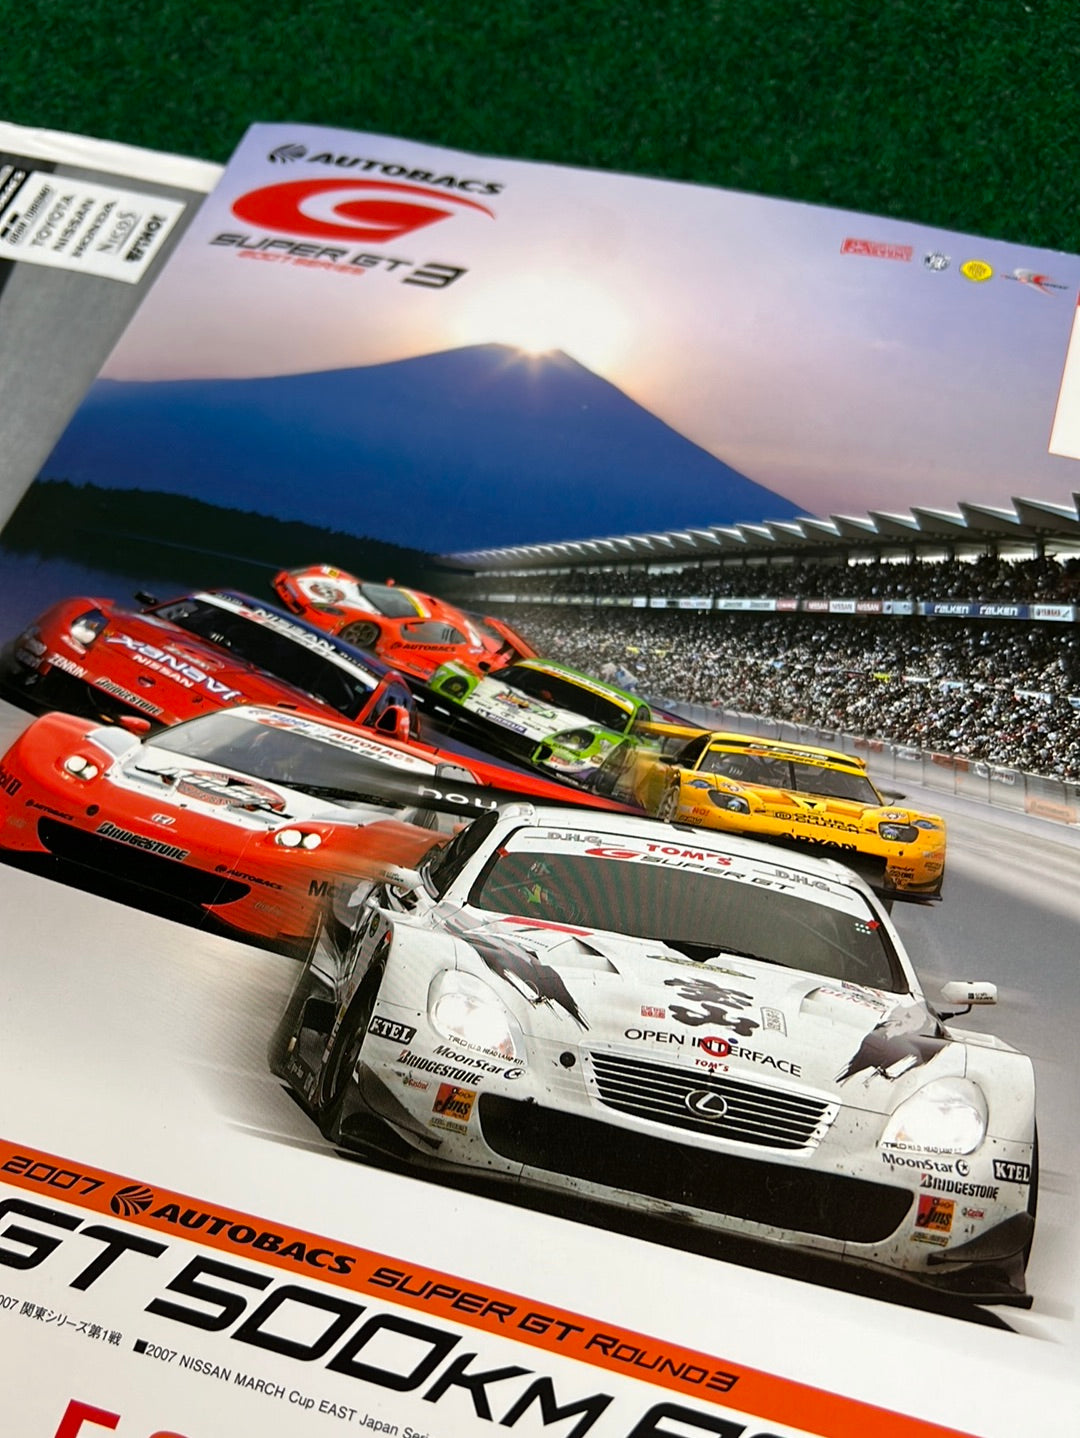 2007 AUTOBACS SuperGT Fuji Speedway 500km Round 3 Official Race Program and Flyer